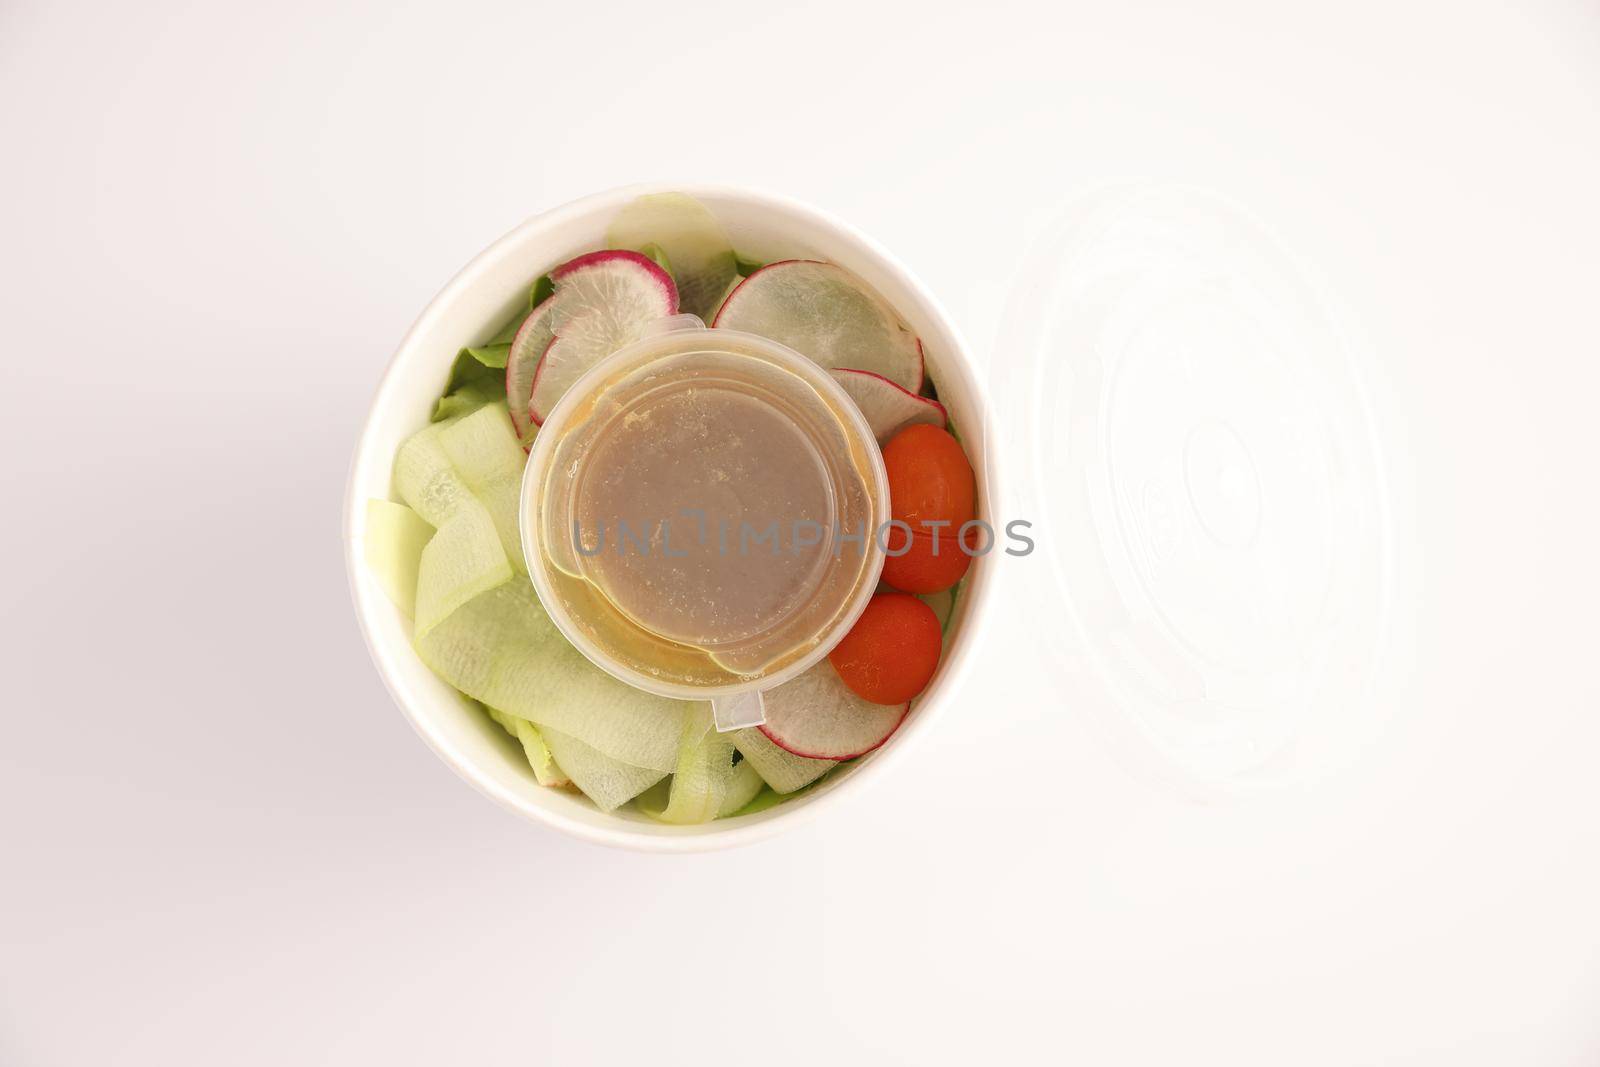 Salad in plastic package for take away or food delivery isolated on white background